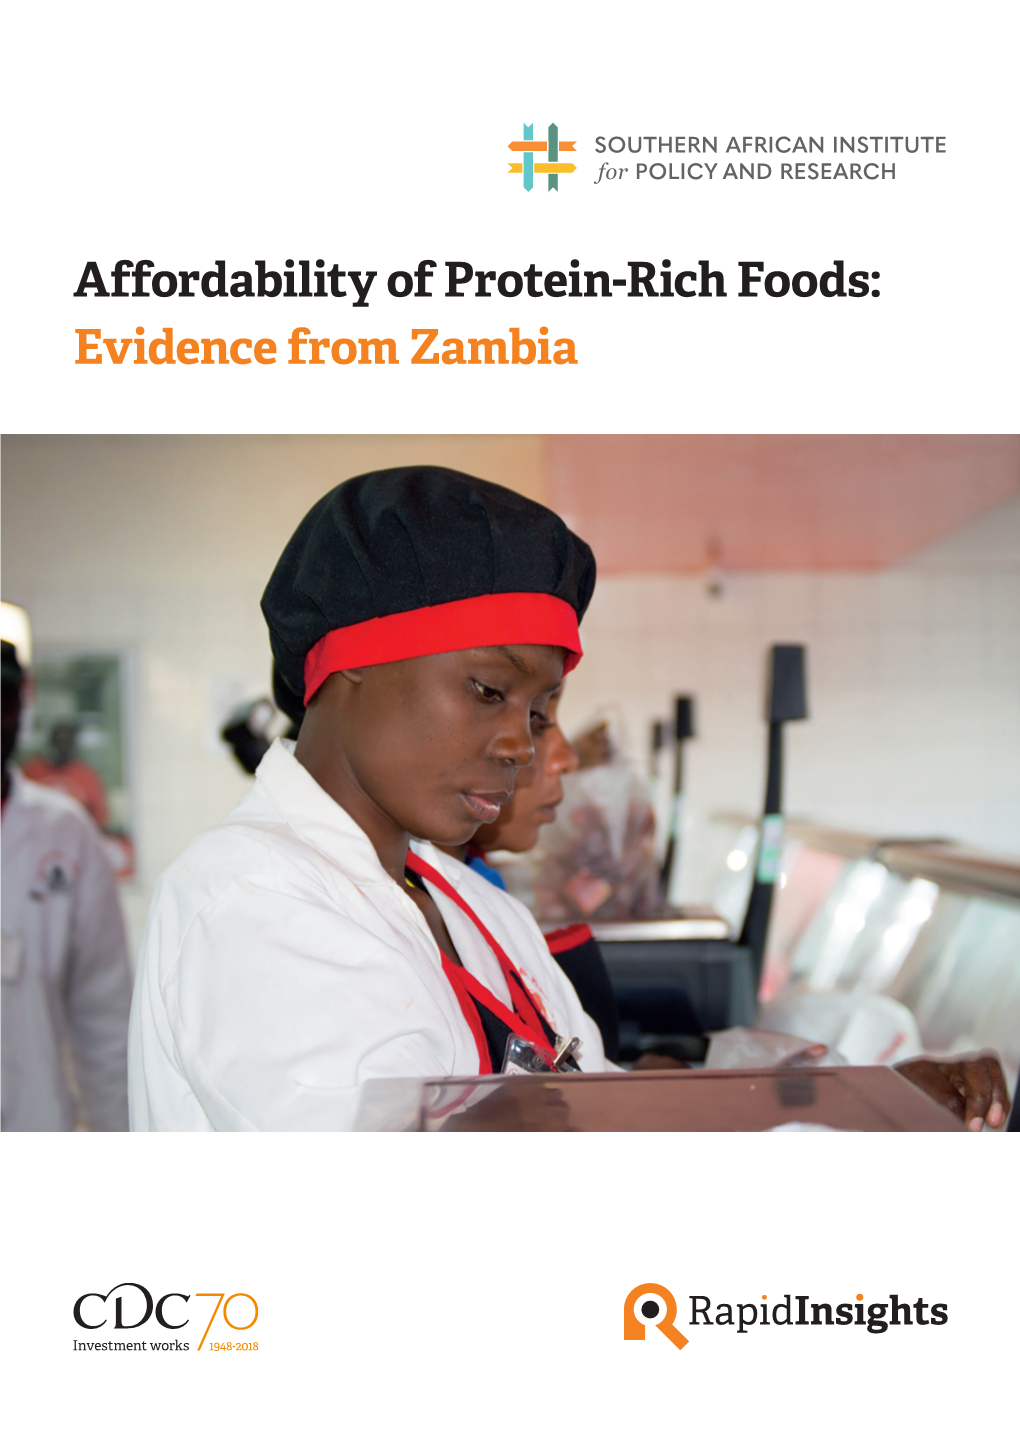 Affordability of Protein-Rich Foods: Evidence from Zambia